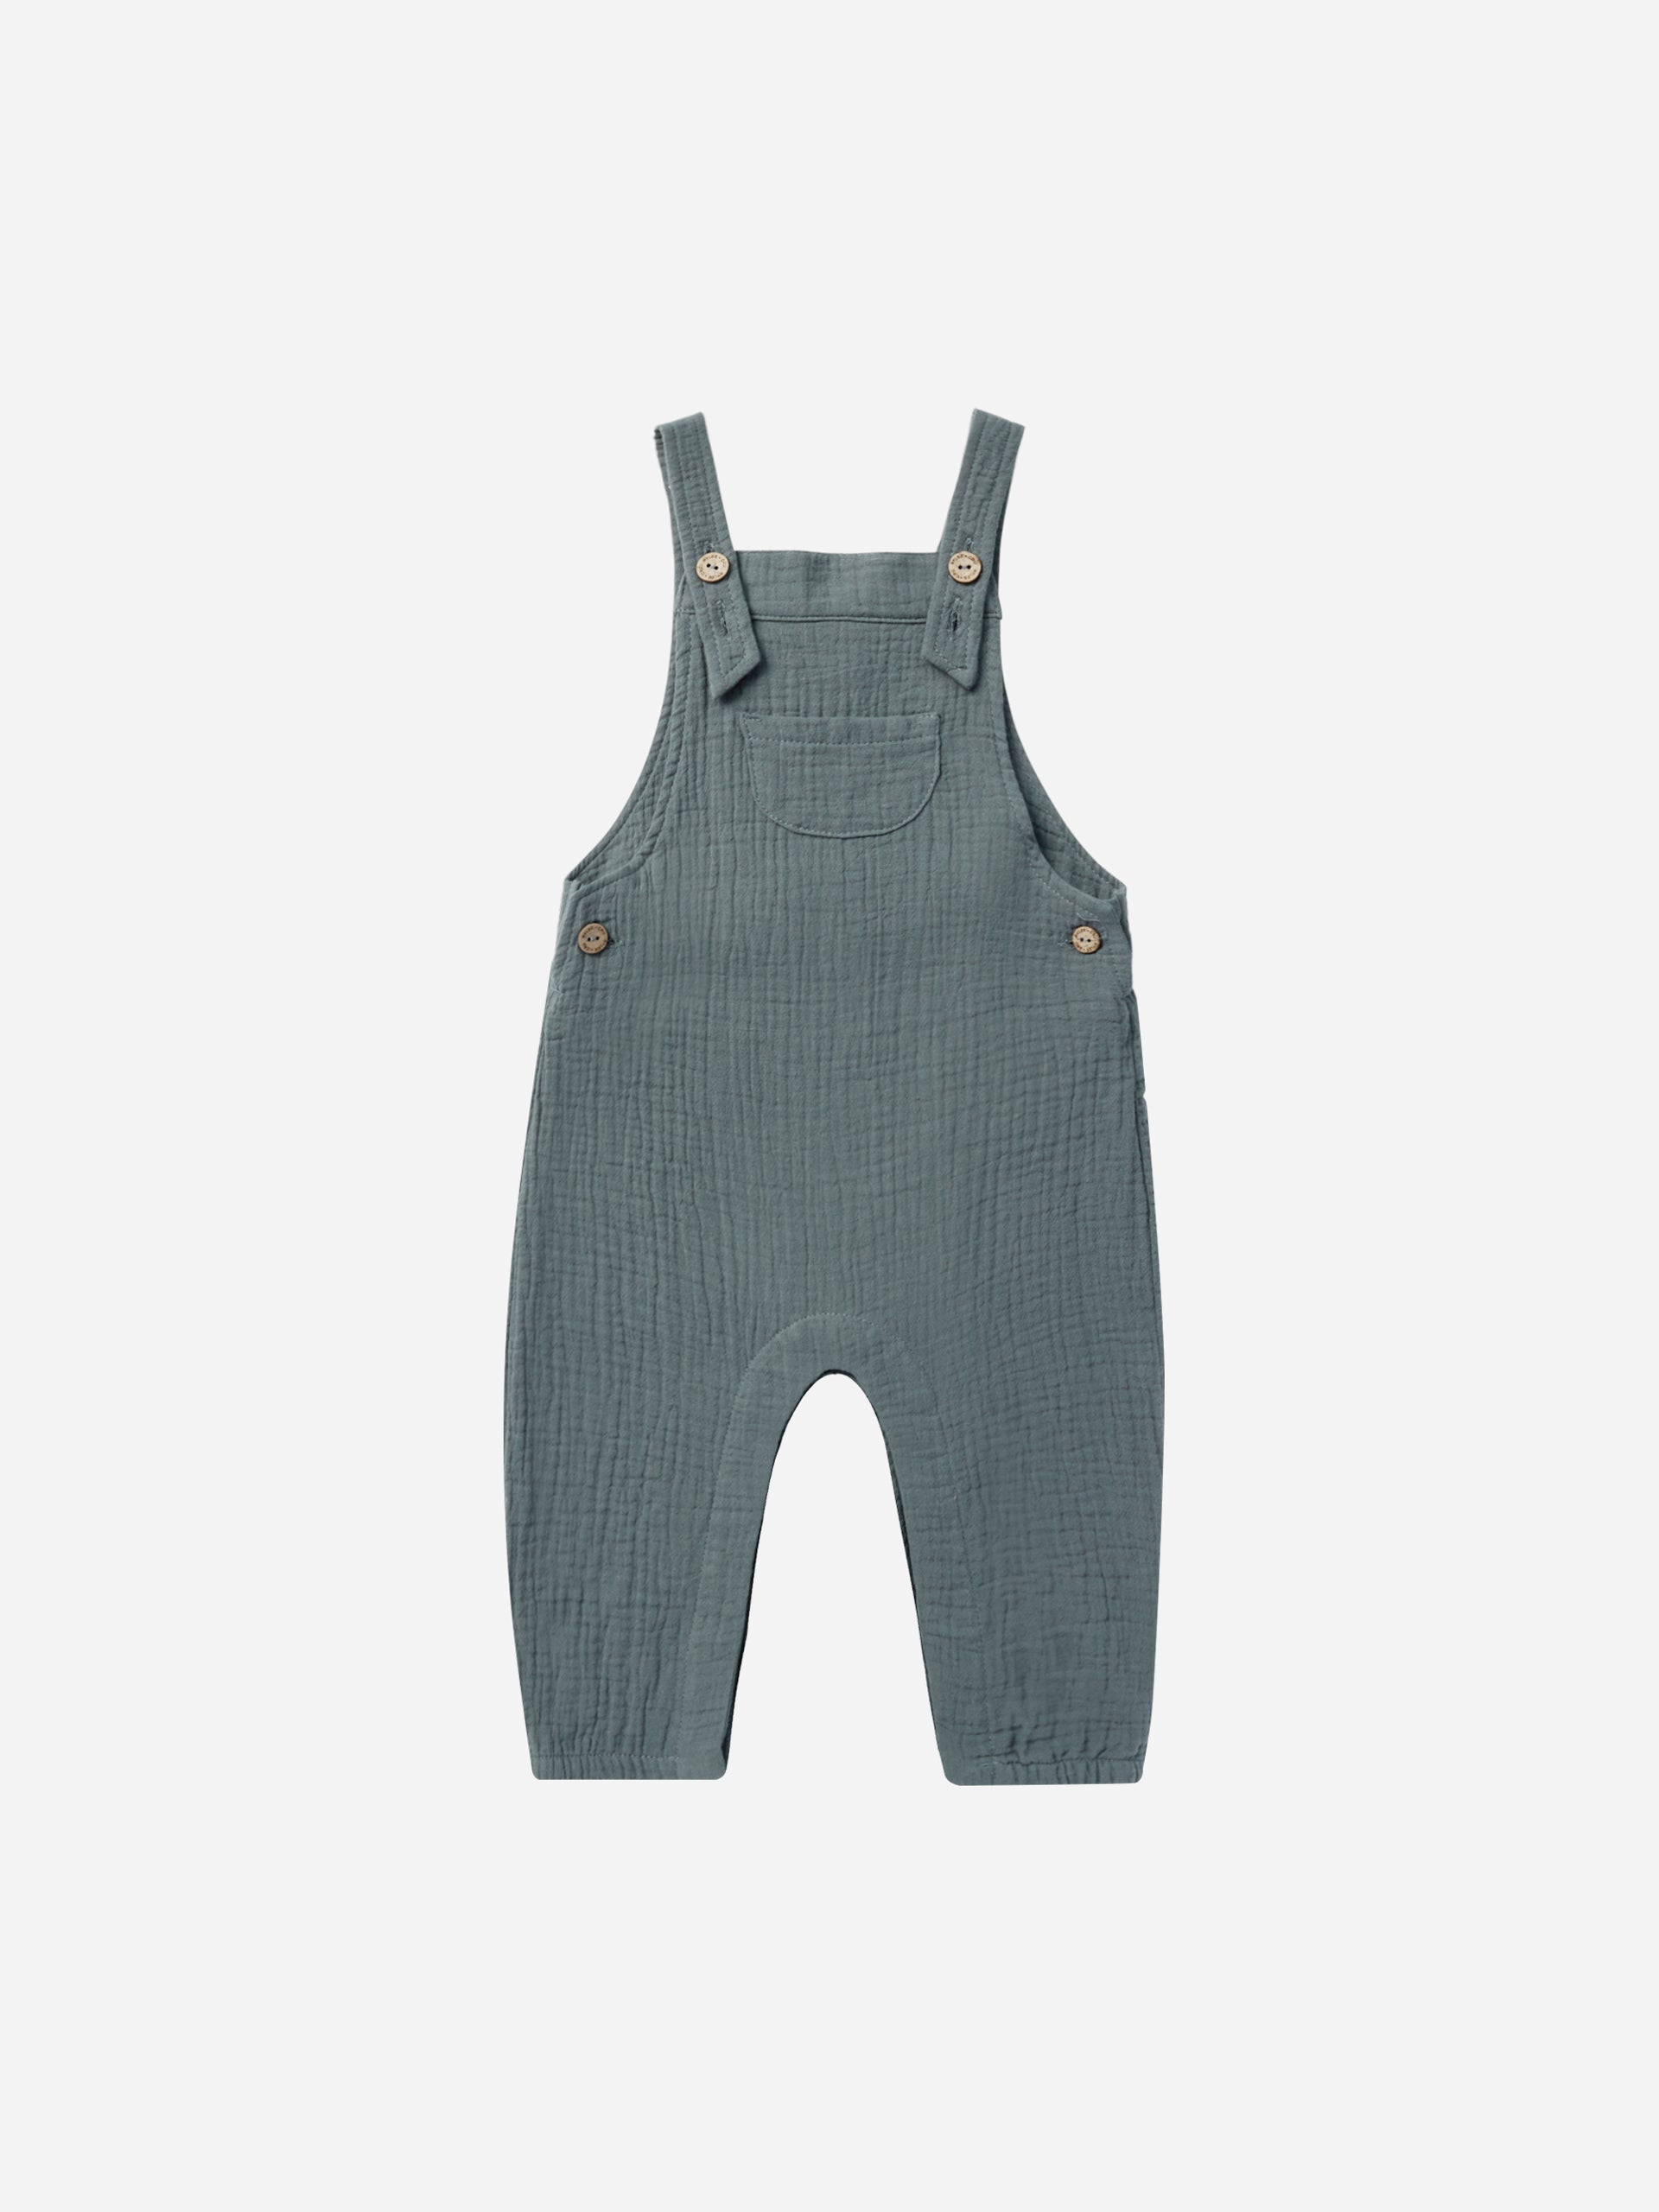 Baby Overall || Indigo - Rylee + Cru | Kids Clothes | Trendy Baby Clothes | Modern Infant Outfits |